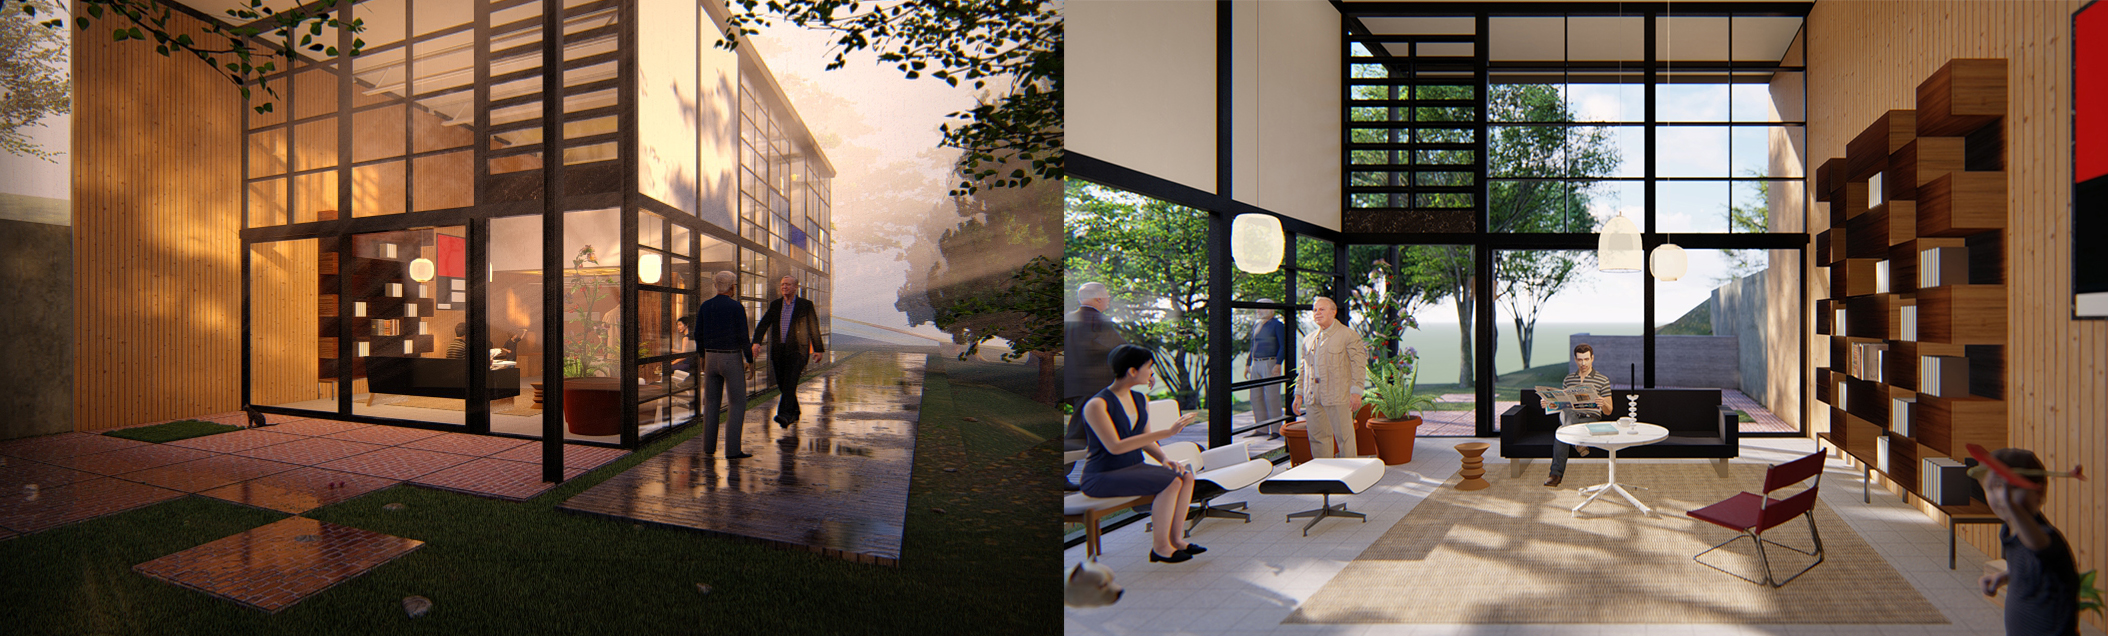 It is the final expected result at the end of this lecture. Rendered image on the left side is an exterior rendering and the right side is an interior renderings.